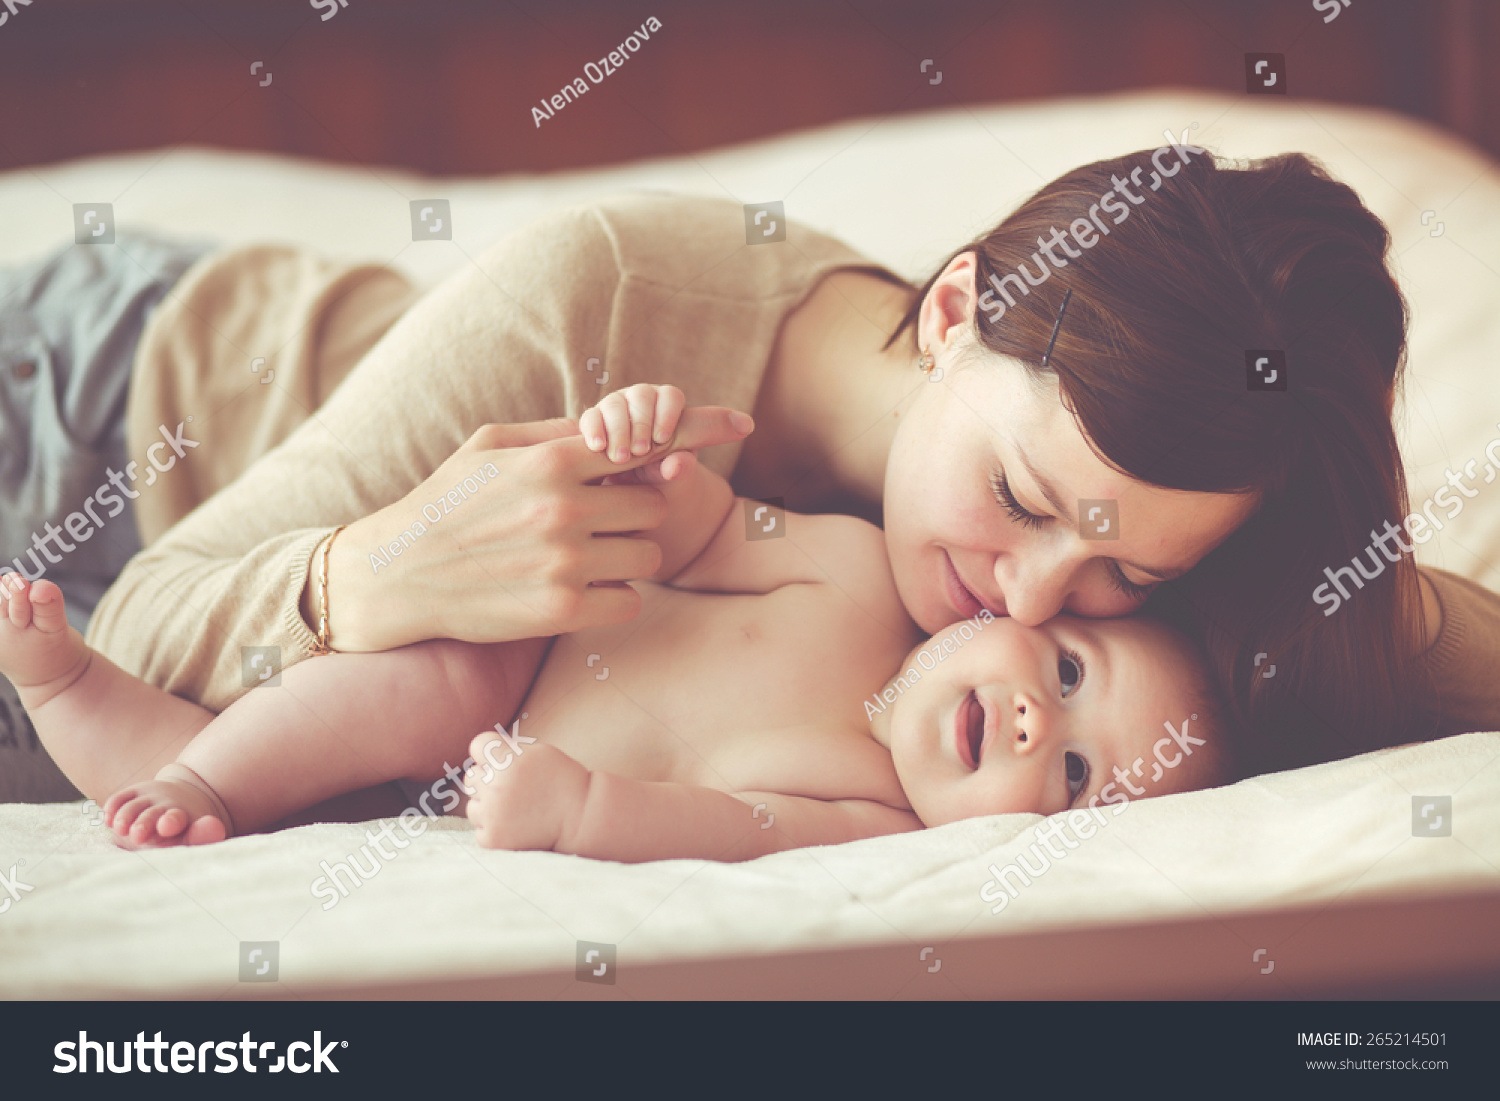 stock-photo-portrait-of-a-mother-with-her-months-old-baby-265214501.jpg